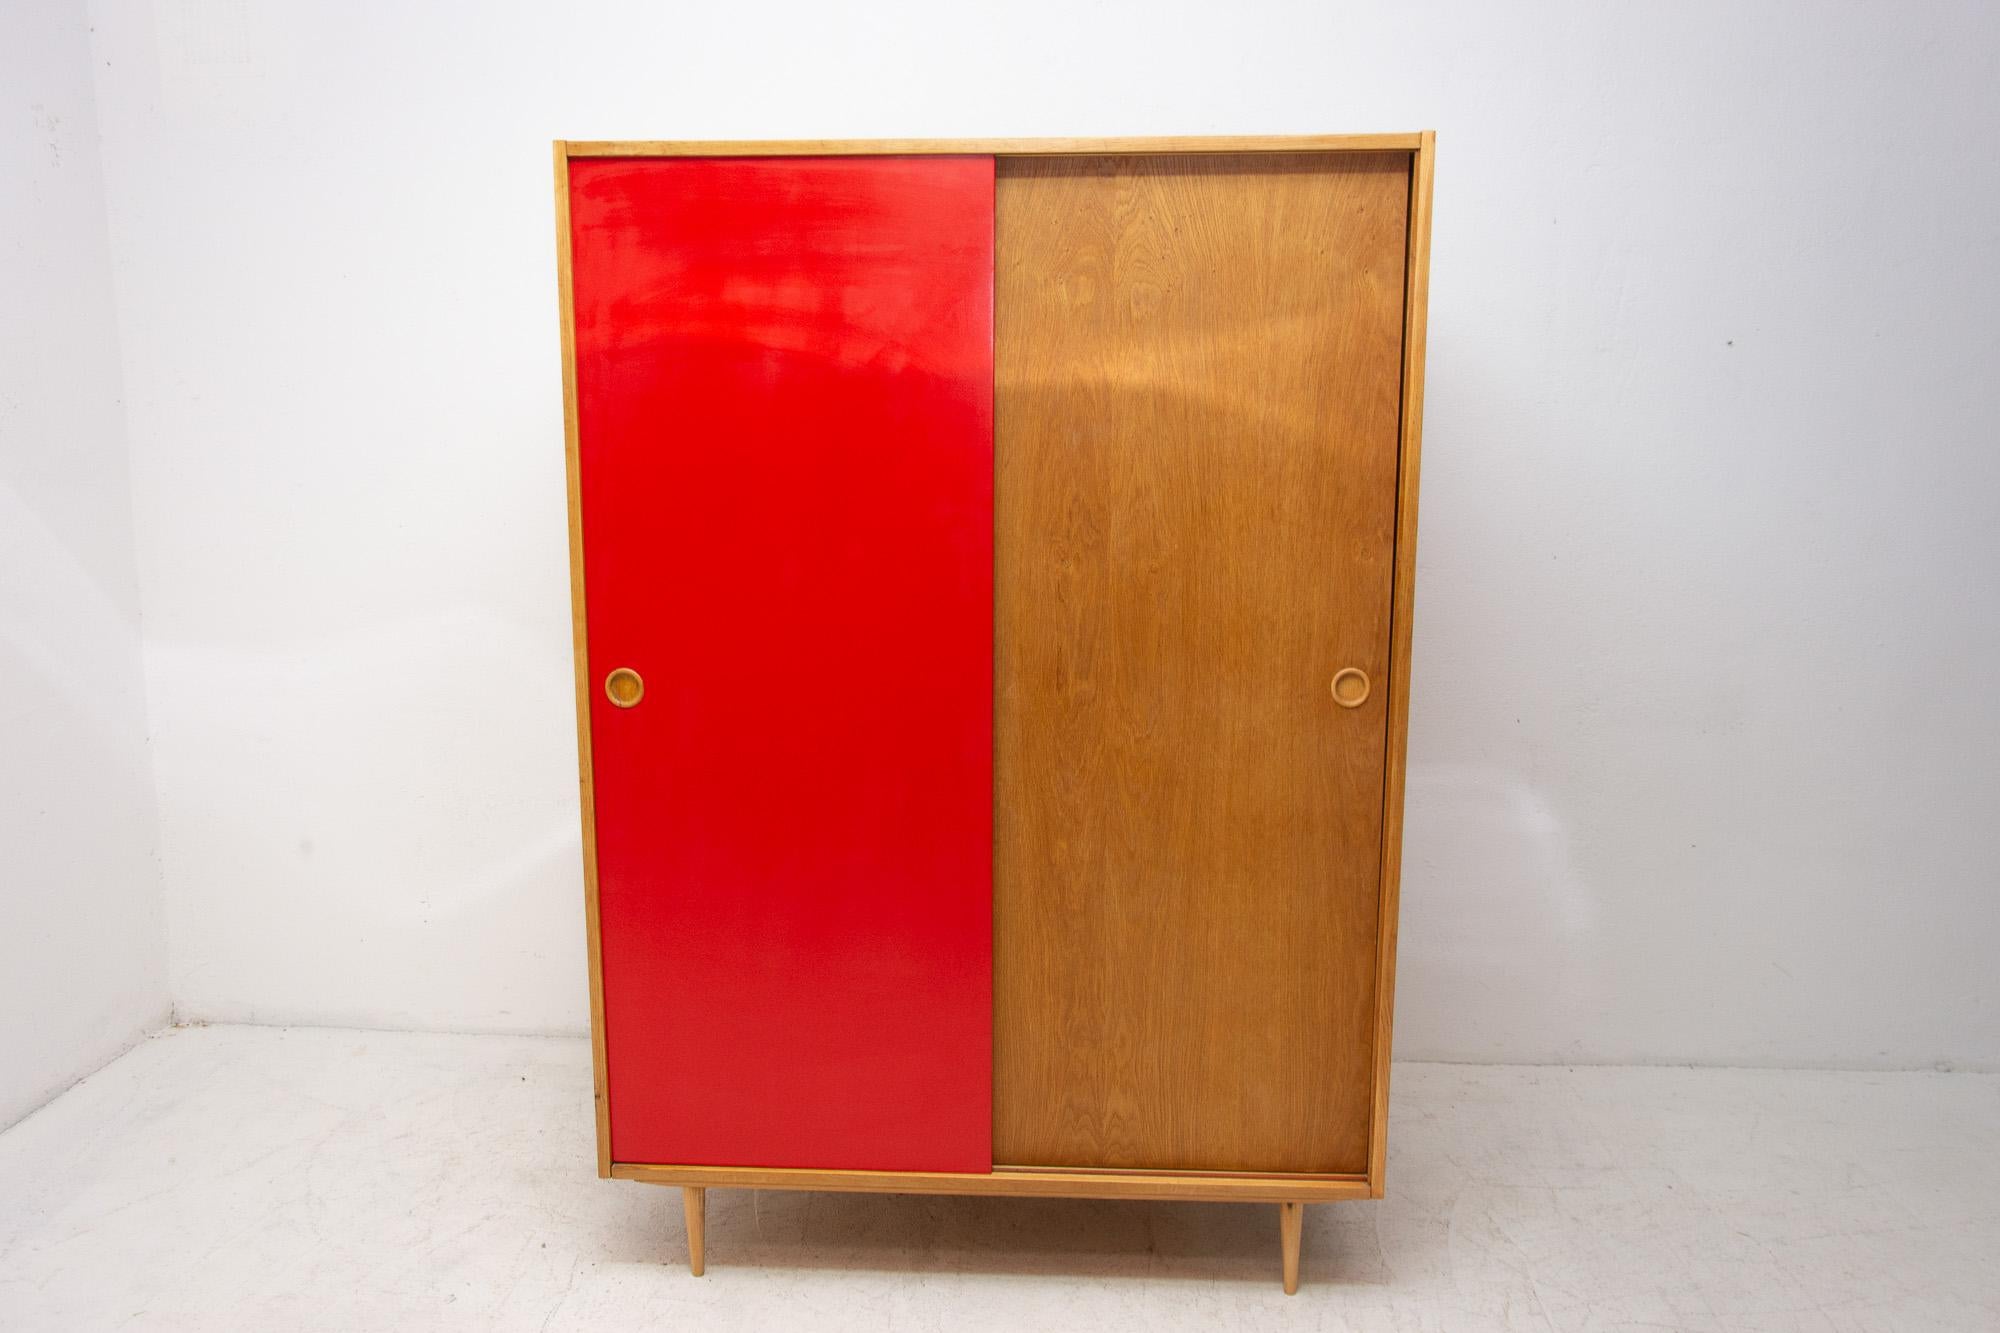 Vintage Czechoslovak modernist Wadrrobe Frantisek Jirak for Tatra nabytok. Made in Czechoslovakia during the 1970s. It is made of beechwood and plywood. The wardrobe is in excellent condition, the wood has been refurbished.